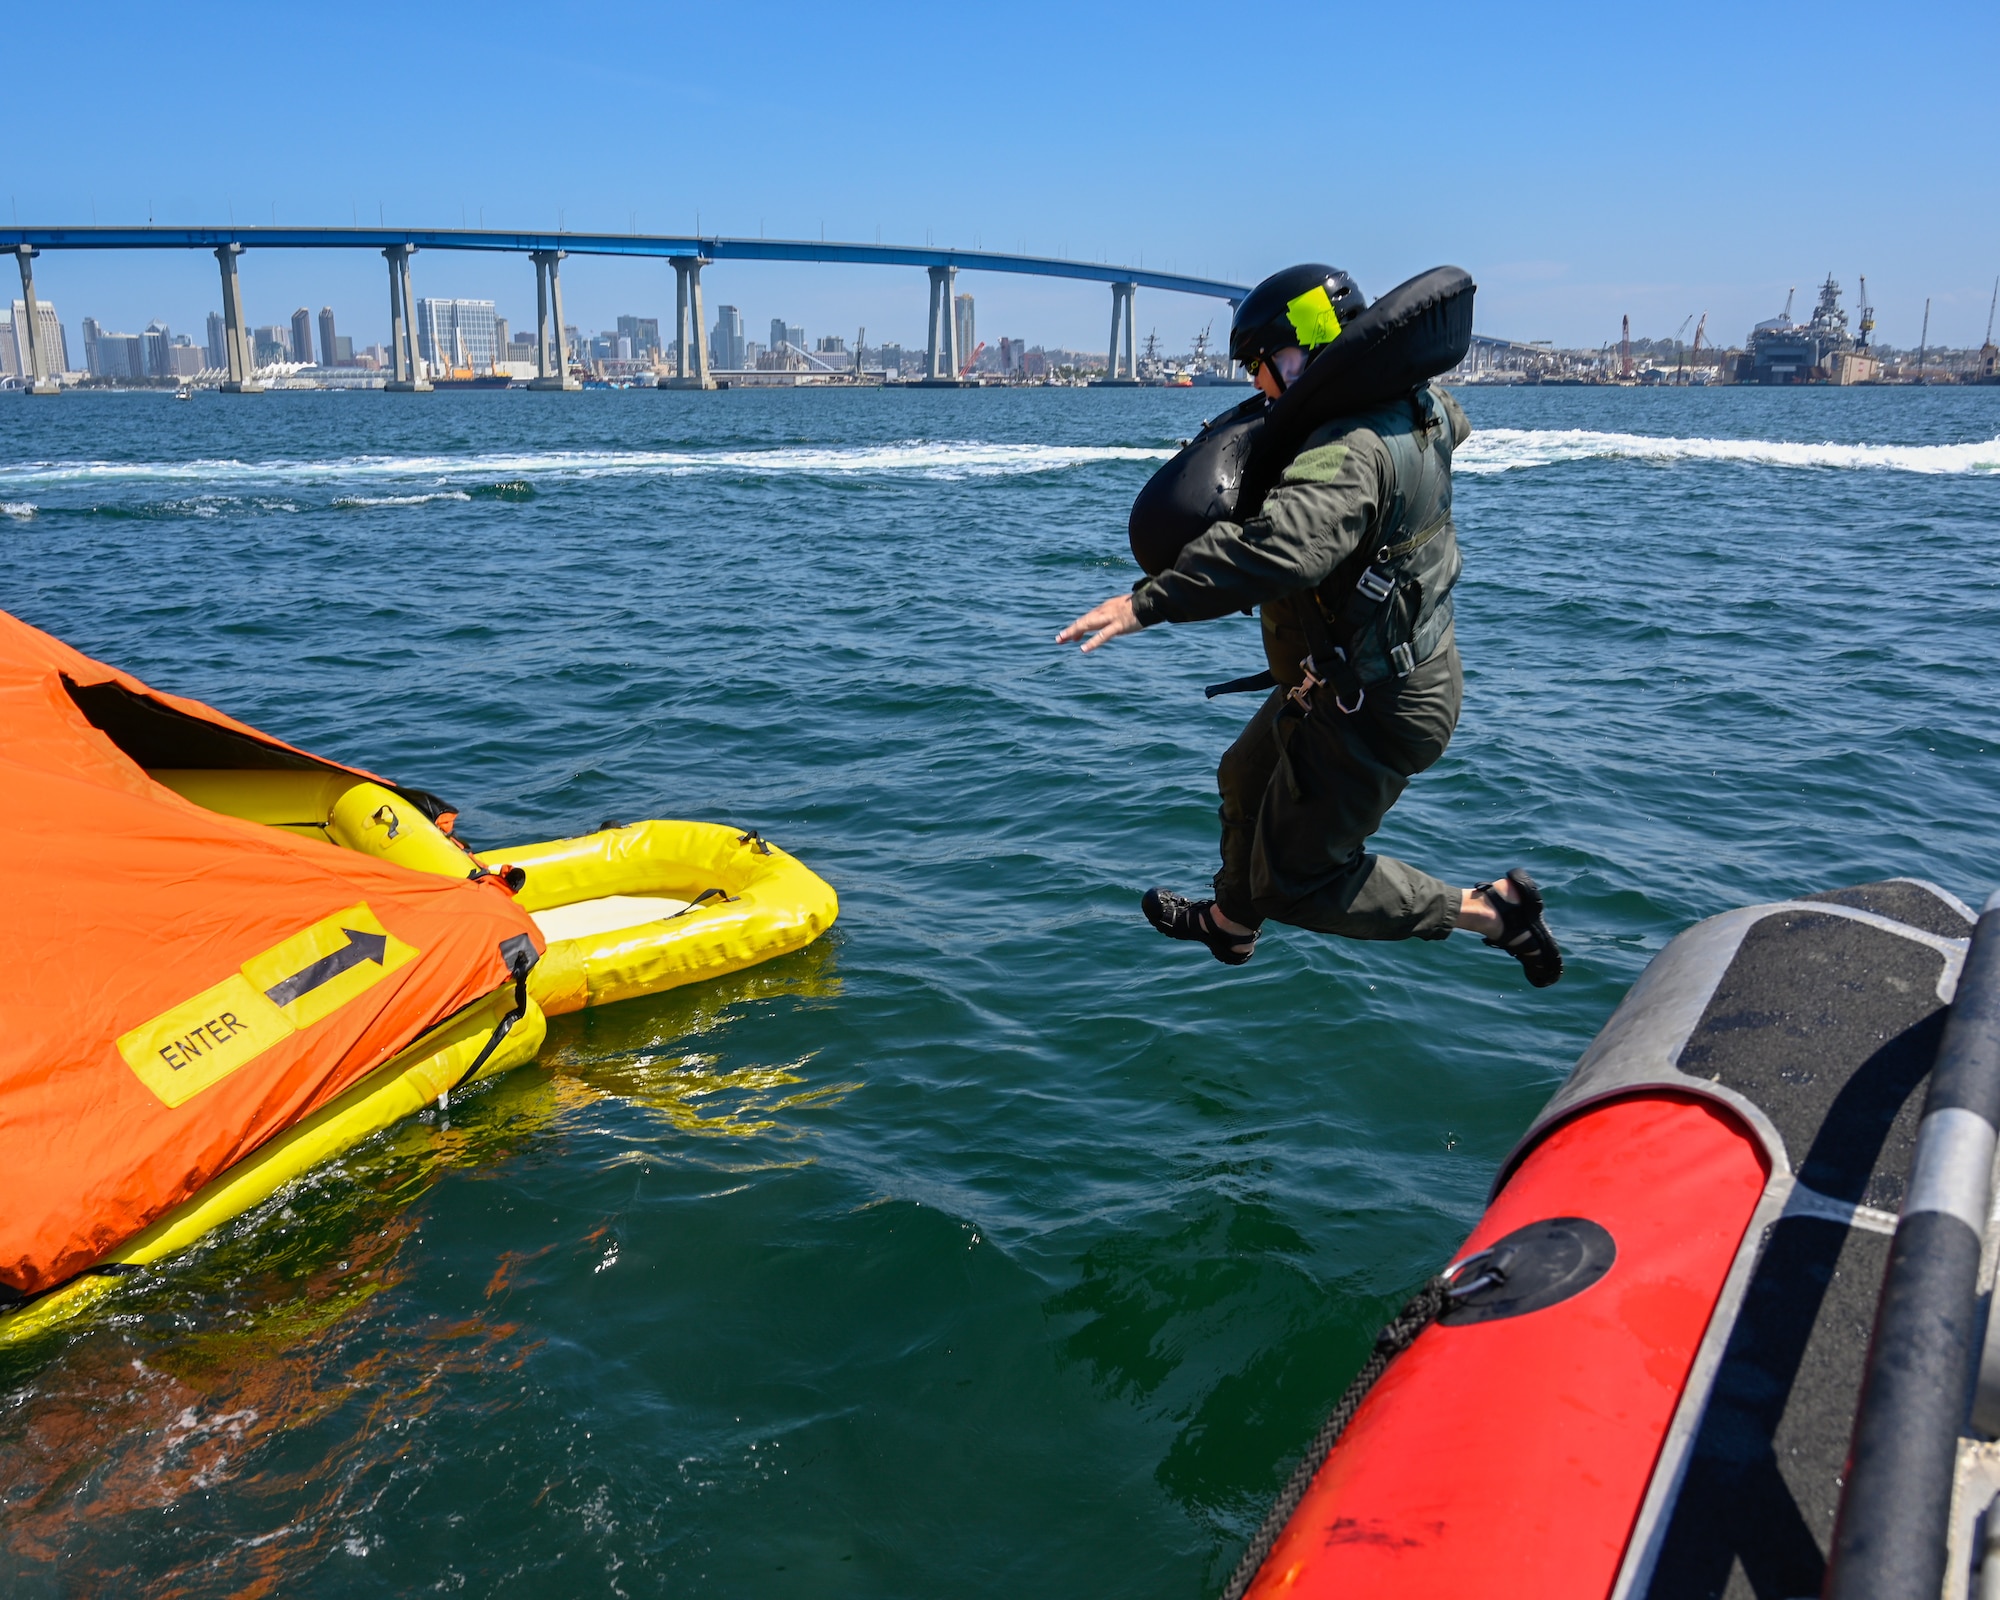 U.S. Air Force Tech Sgt. Alexandria Panduro, aircrew flight equipment technician at the 144th Fighter Wing, jumps towards the life raft to prepare for the helicopter extraction at Naval Amphibious Air Base Coronado, San Diego, July 10. Pilots must complete water survival training every three years to maintain combat readiness. (U.S. Air National Guard photo by Staff Sgt. Aubrey Pomares)